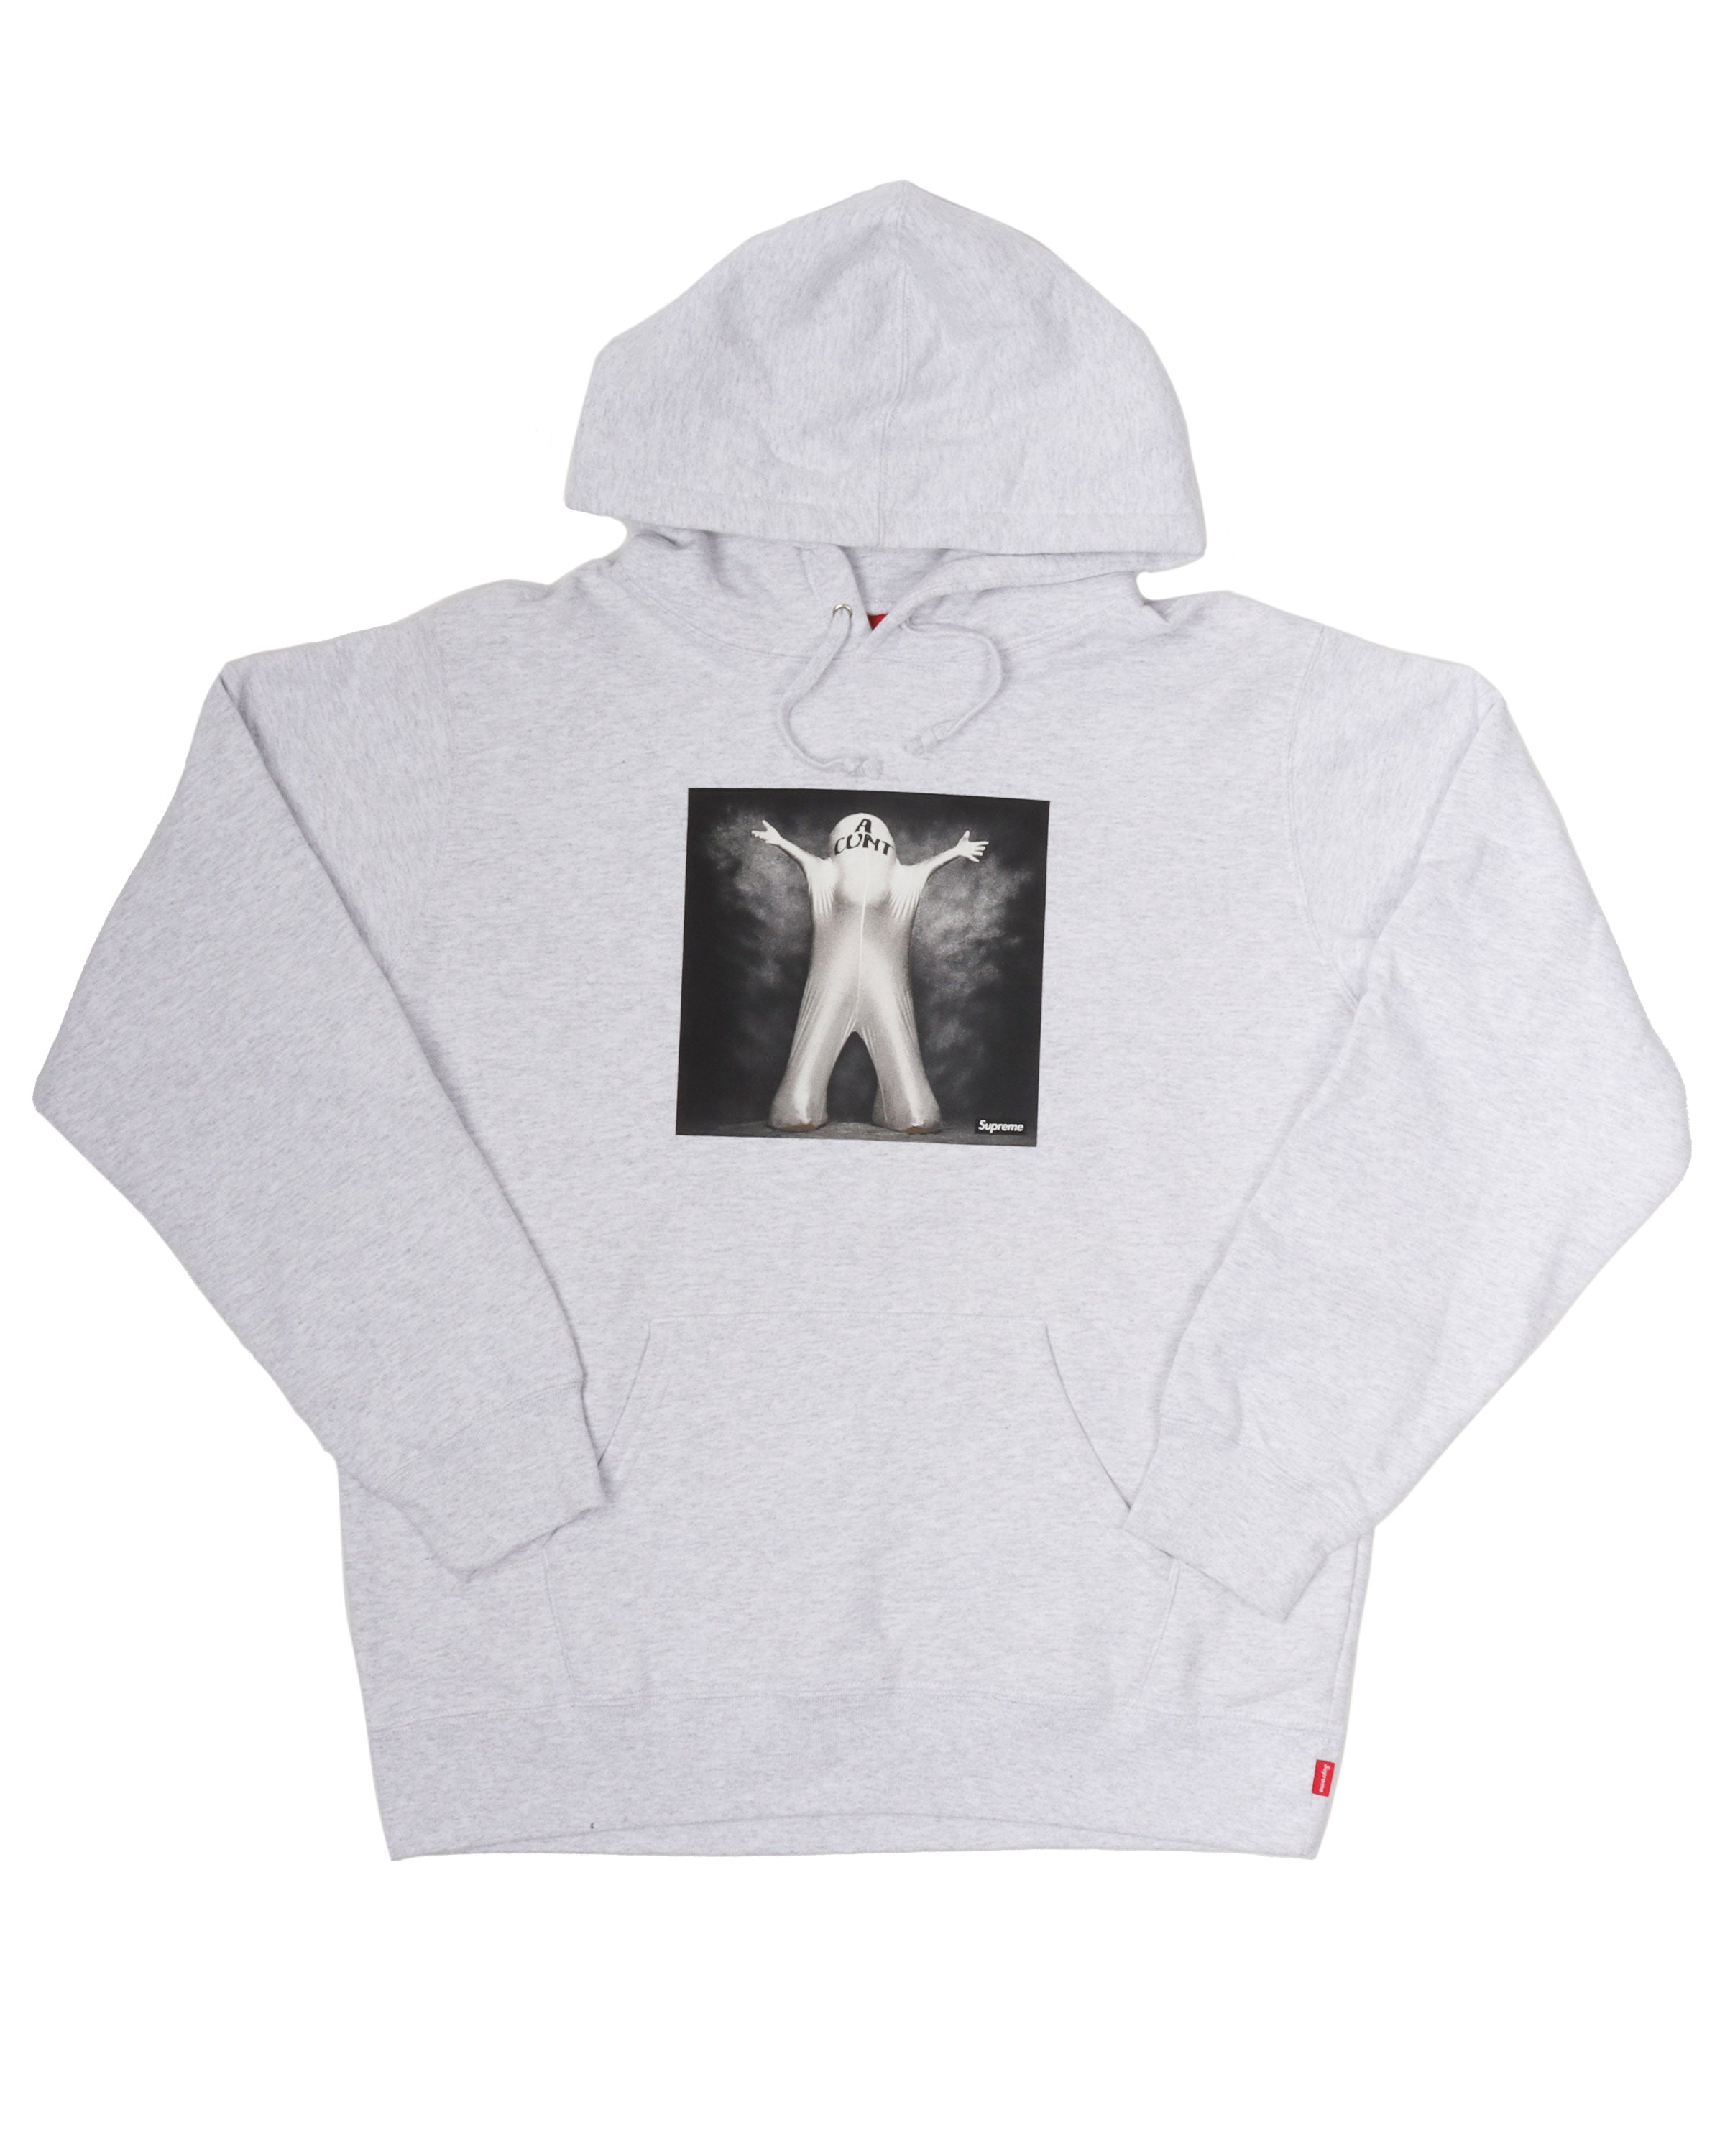 Leigh Bowery "A Cunt" Hoodie